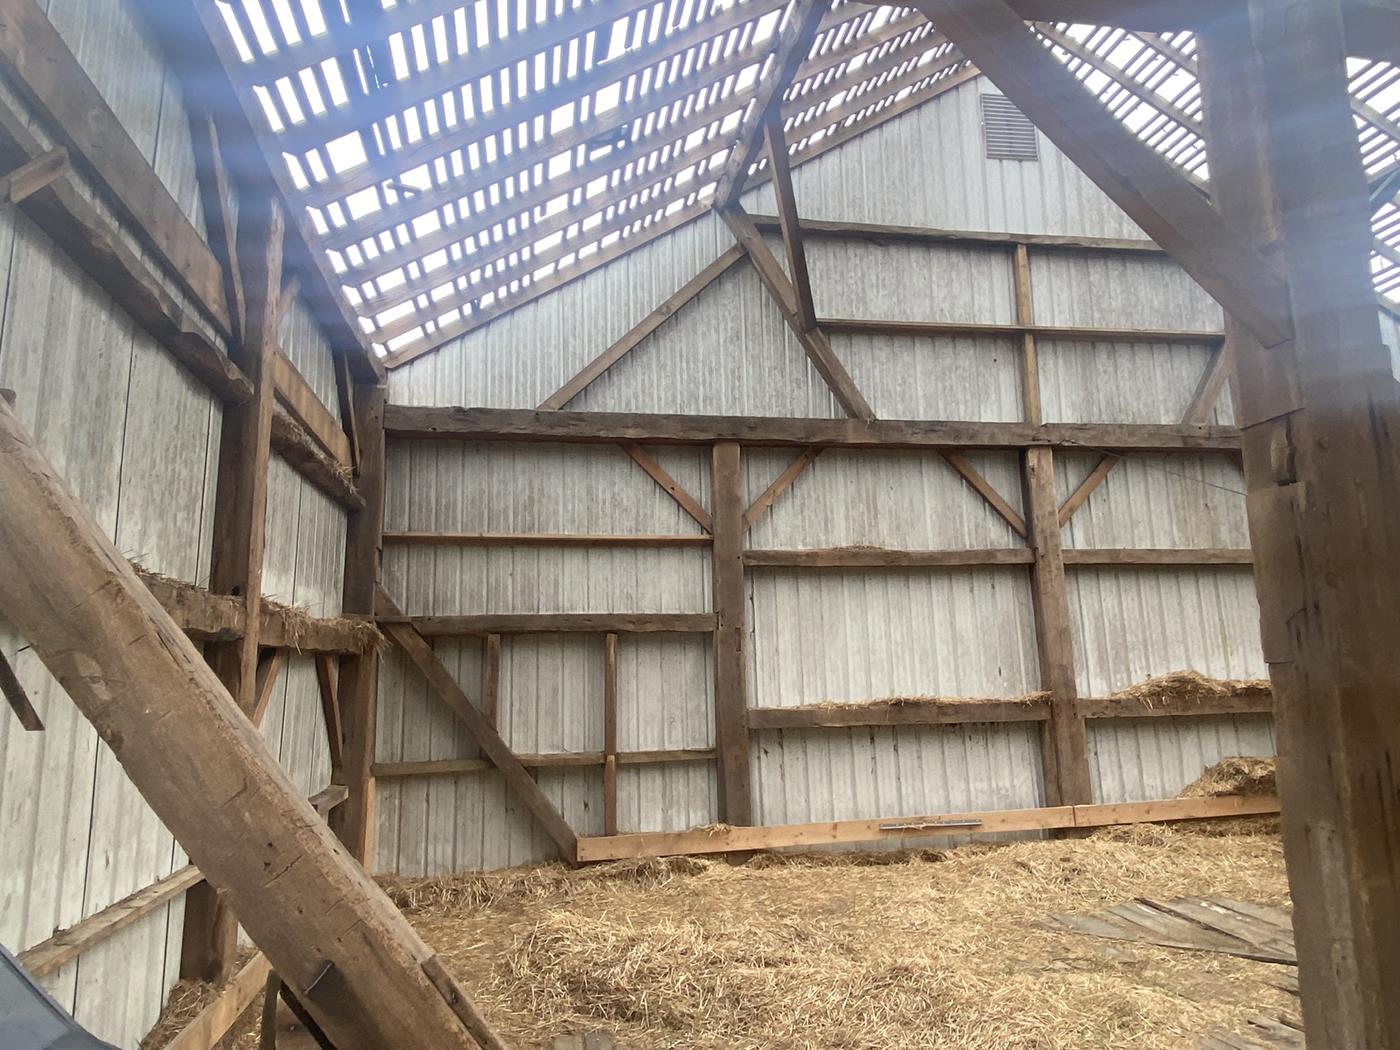 https://www.ohiovalleybarnsalvage.com/images/Mast Barn Frame Ohio Valley Salvage - Your Source For Hand-Hewn Two-Sided Sleepers